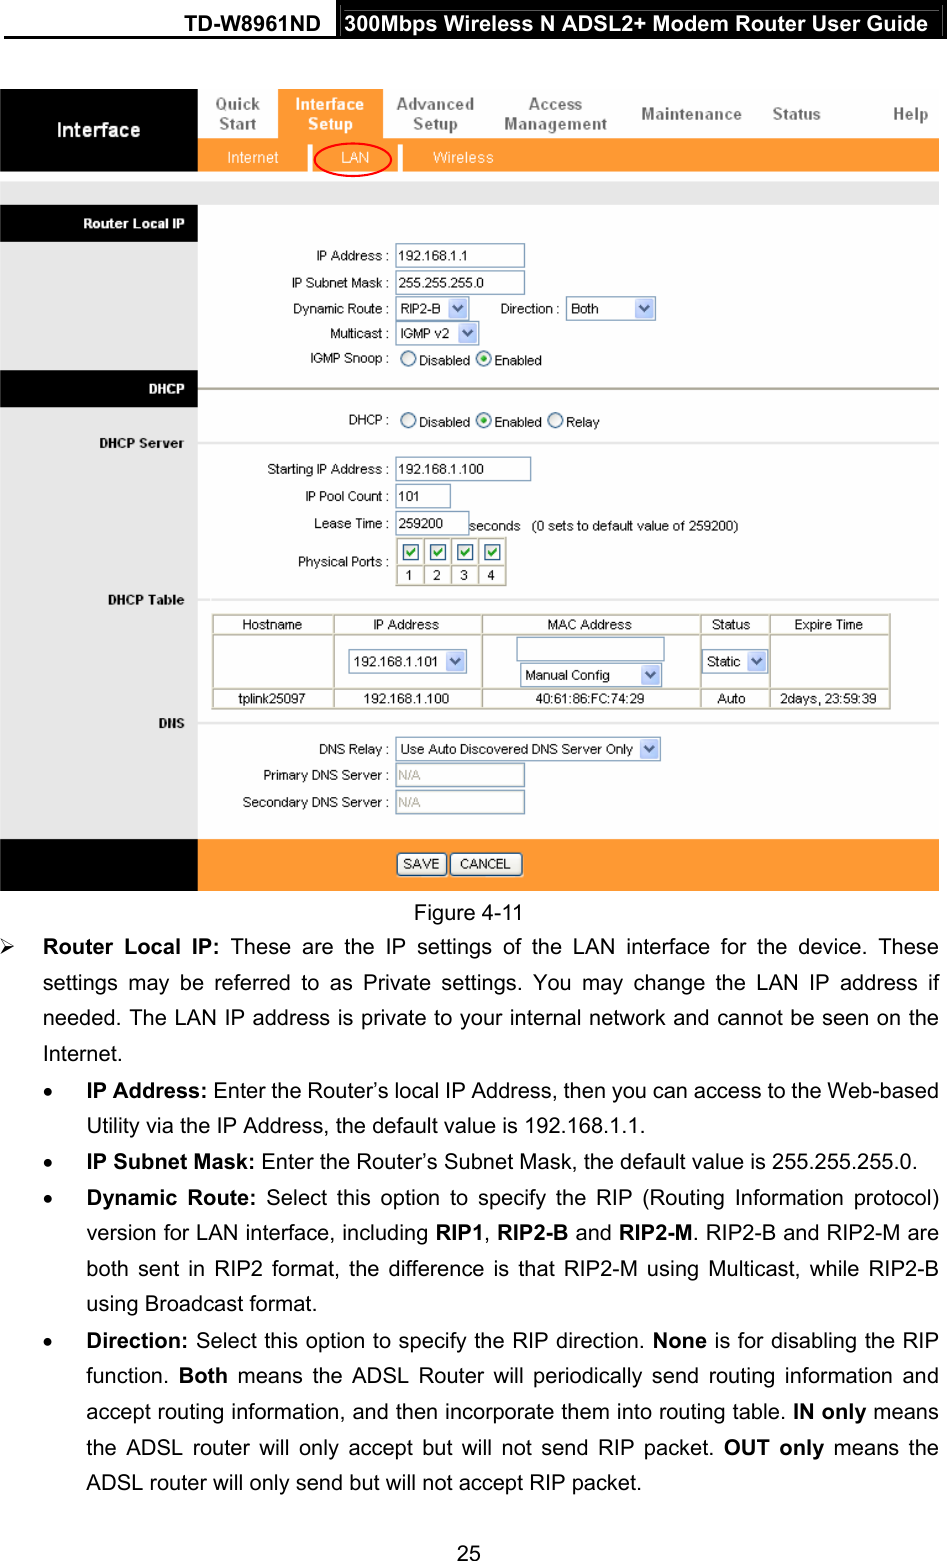 TD-W8961ND  300Mbps Wireless N ADSL2+ Modem Router User Guide  25  Figure 4-11 ¾ Router Local IP: These are the IP settings of the LAN interface for the device. These settings may be referred to as Private settings. You may change the LAN IP address if needed. The LAN IP address is private to your internal network and cannot be seen on the Internet. • IP Address: Enter the Router’s local IP Address, then you can access to the Web-based Utility via the IP Address, the default value is 192.168.1.1. • IP Subnet Mask: Enter the Router’s Subnet Mask, the default value is 255.255.255.0. • Dynamic Route: Select this option to specify the RIP (Routing Information protocol) version for LAN interface, including RIP1, RIP2-B and RIP2-M. RIP2-B and RIP2-M are both sent in RIP2 format, the difference is that RIP2-M using Multicast, while RIP2-B using Broadcast format. • Direction: Select this option to specify the RIP direction. None is for disabling the RIP function.  Both means the ADSL Router will periodically send routing information and accept routing information, and then incorporate them into routing table. IN only means the ADSL router will only accept but will not send RIP packet. OUT only means the ADSL router will only send but will not accept RIP packet. 